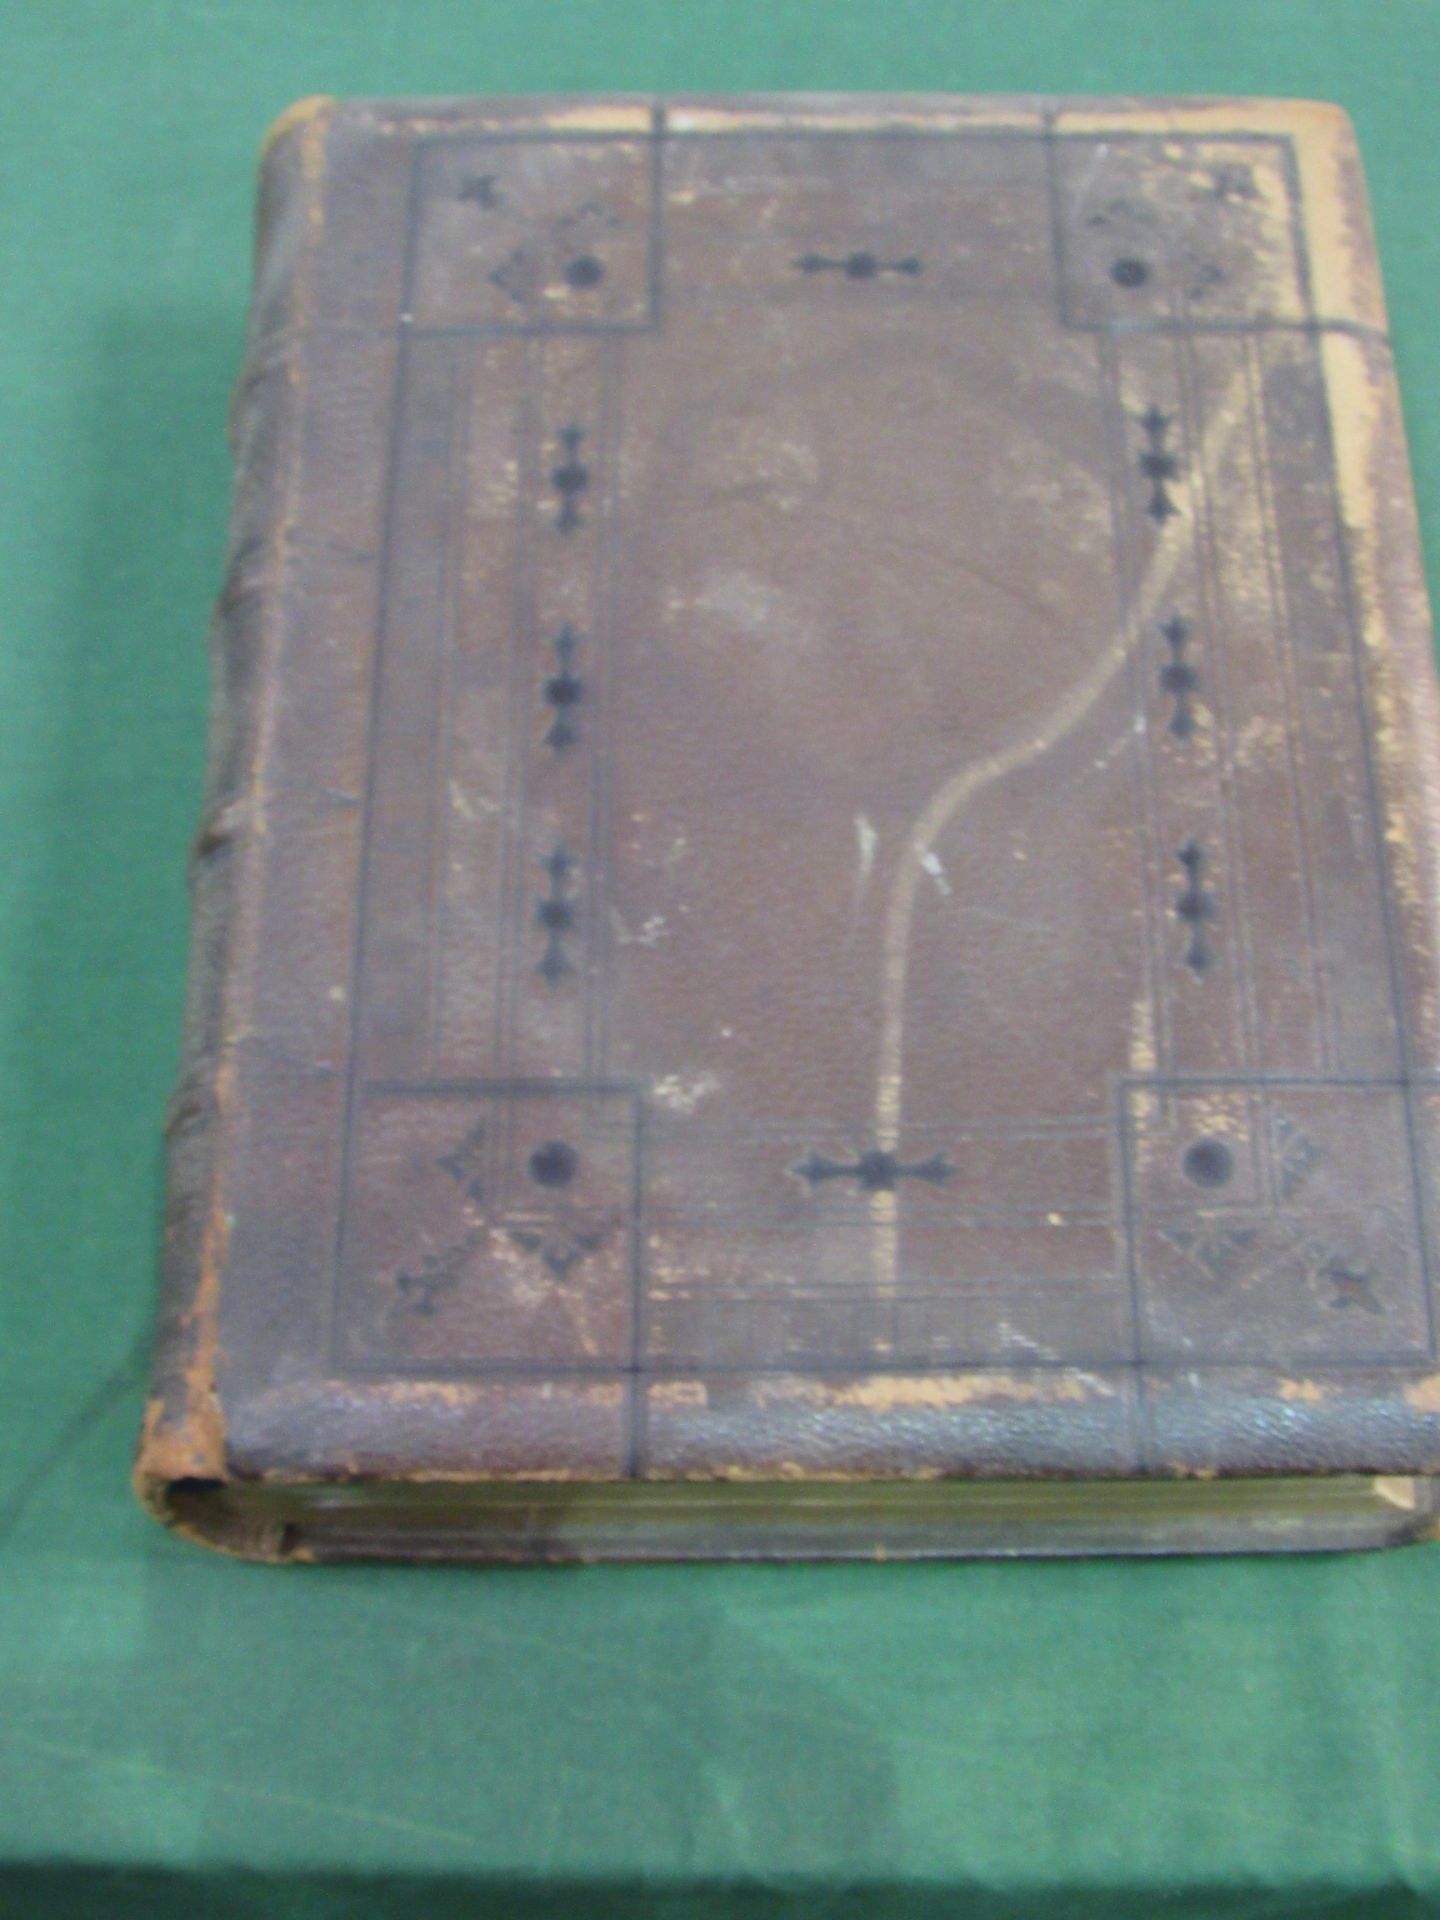 Leather bound Holy Bible, Oxford Press 1865. Estimate £10-20.